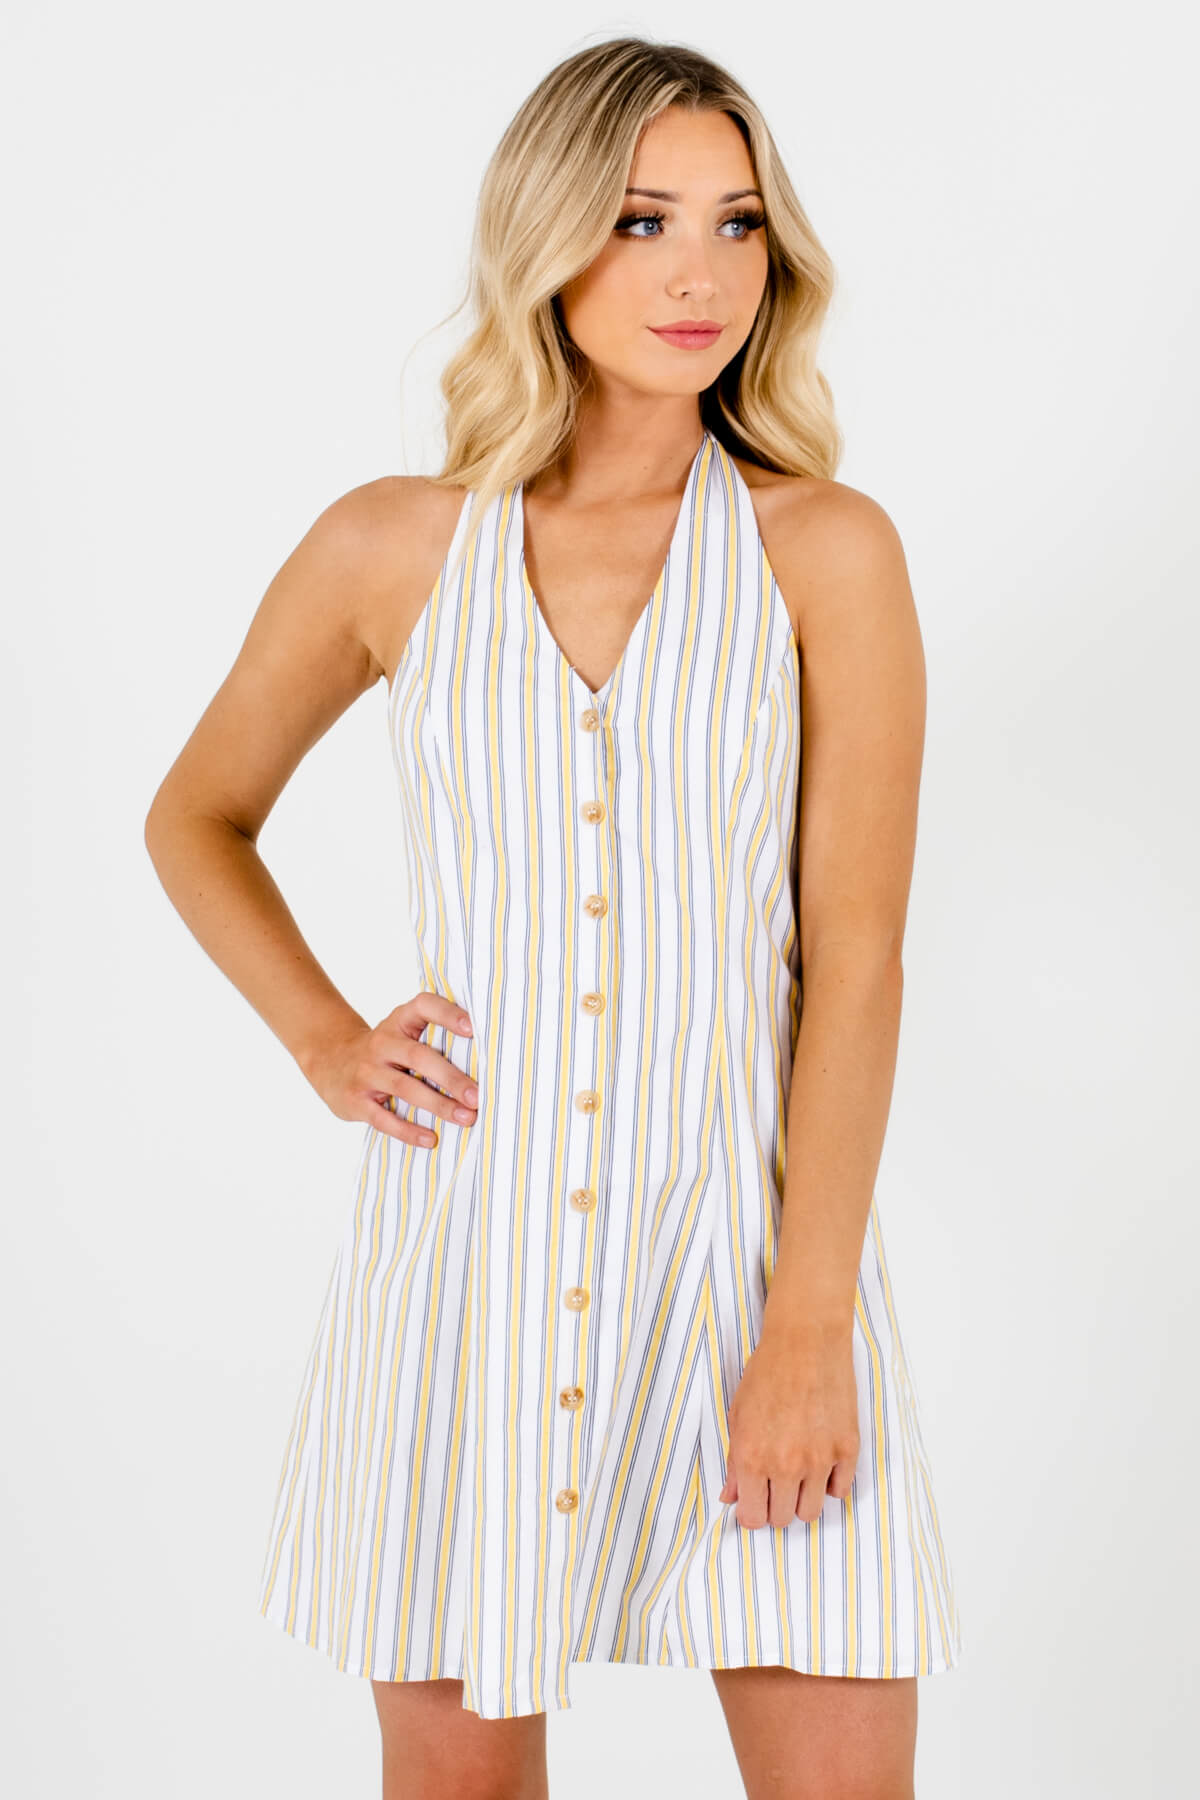 White Yellow and Blue Striped Patterned Boutique Mini Dresses for Women